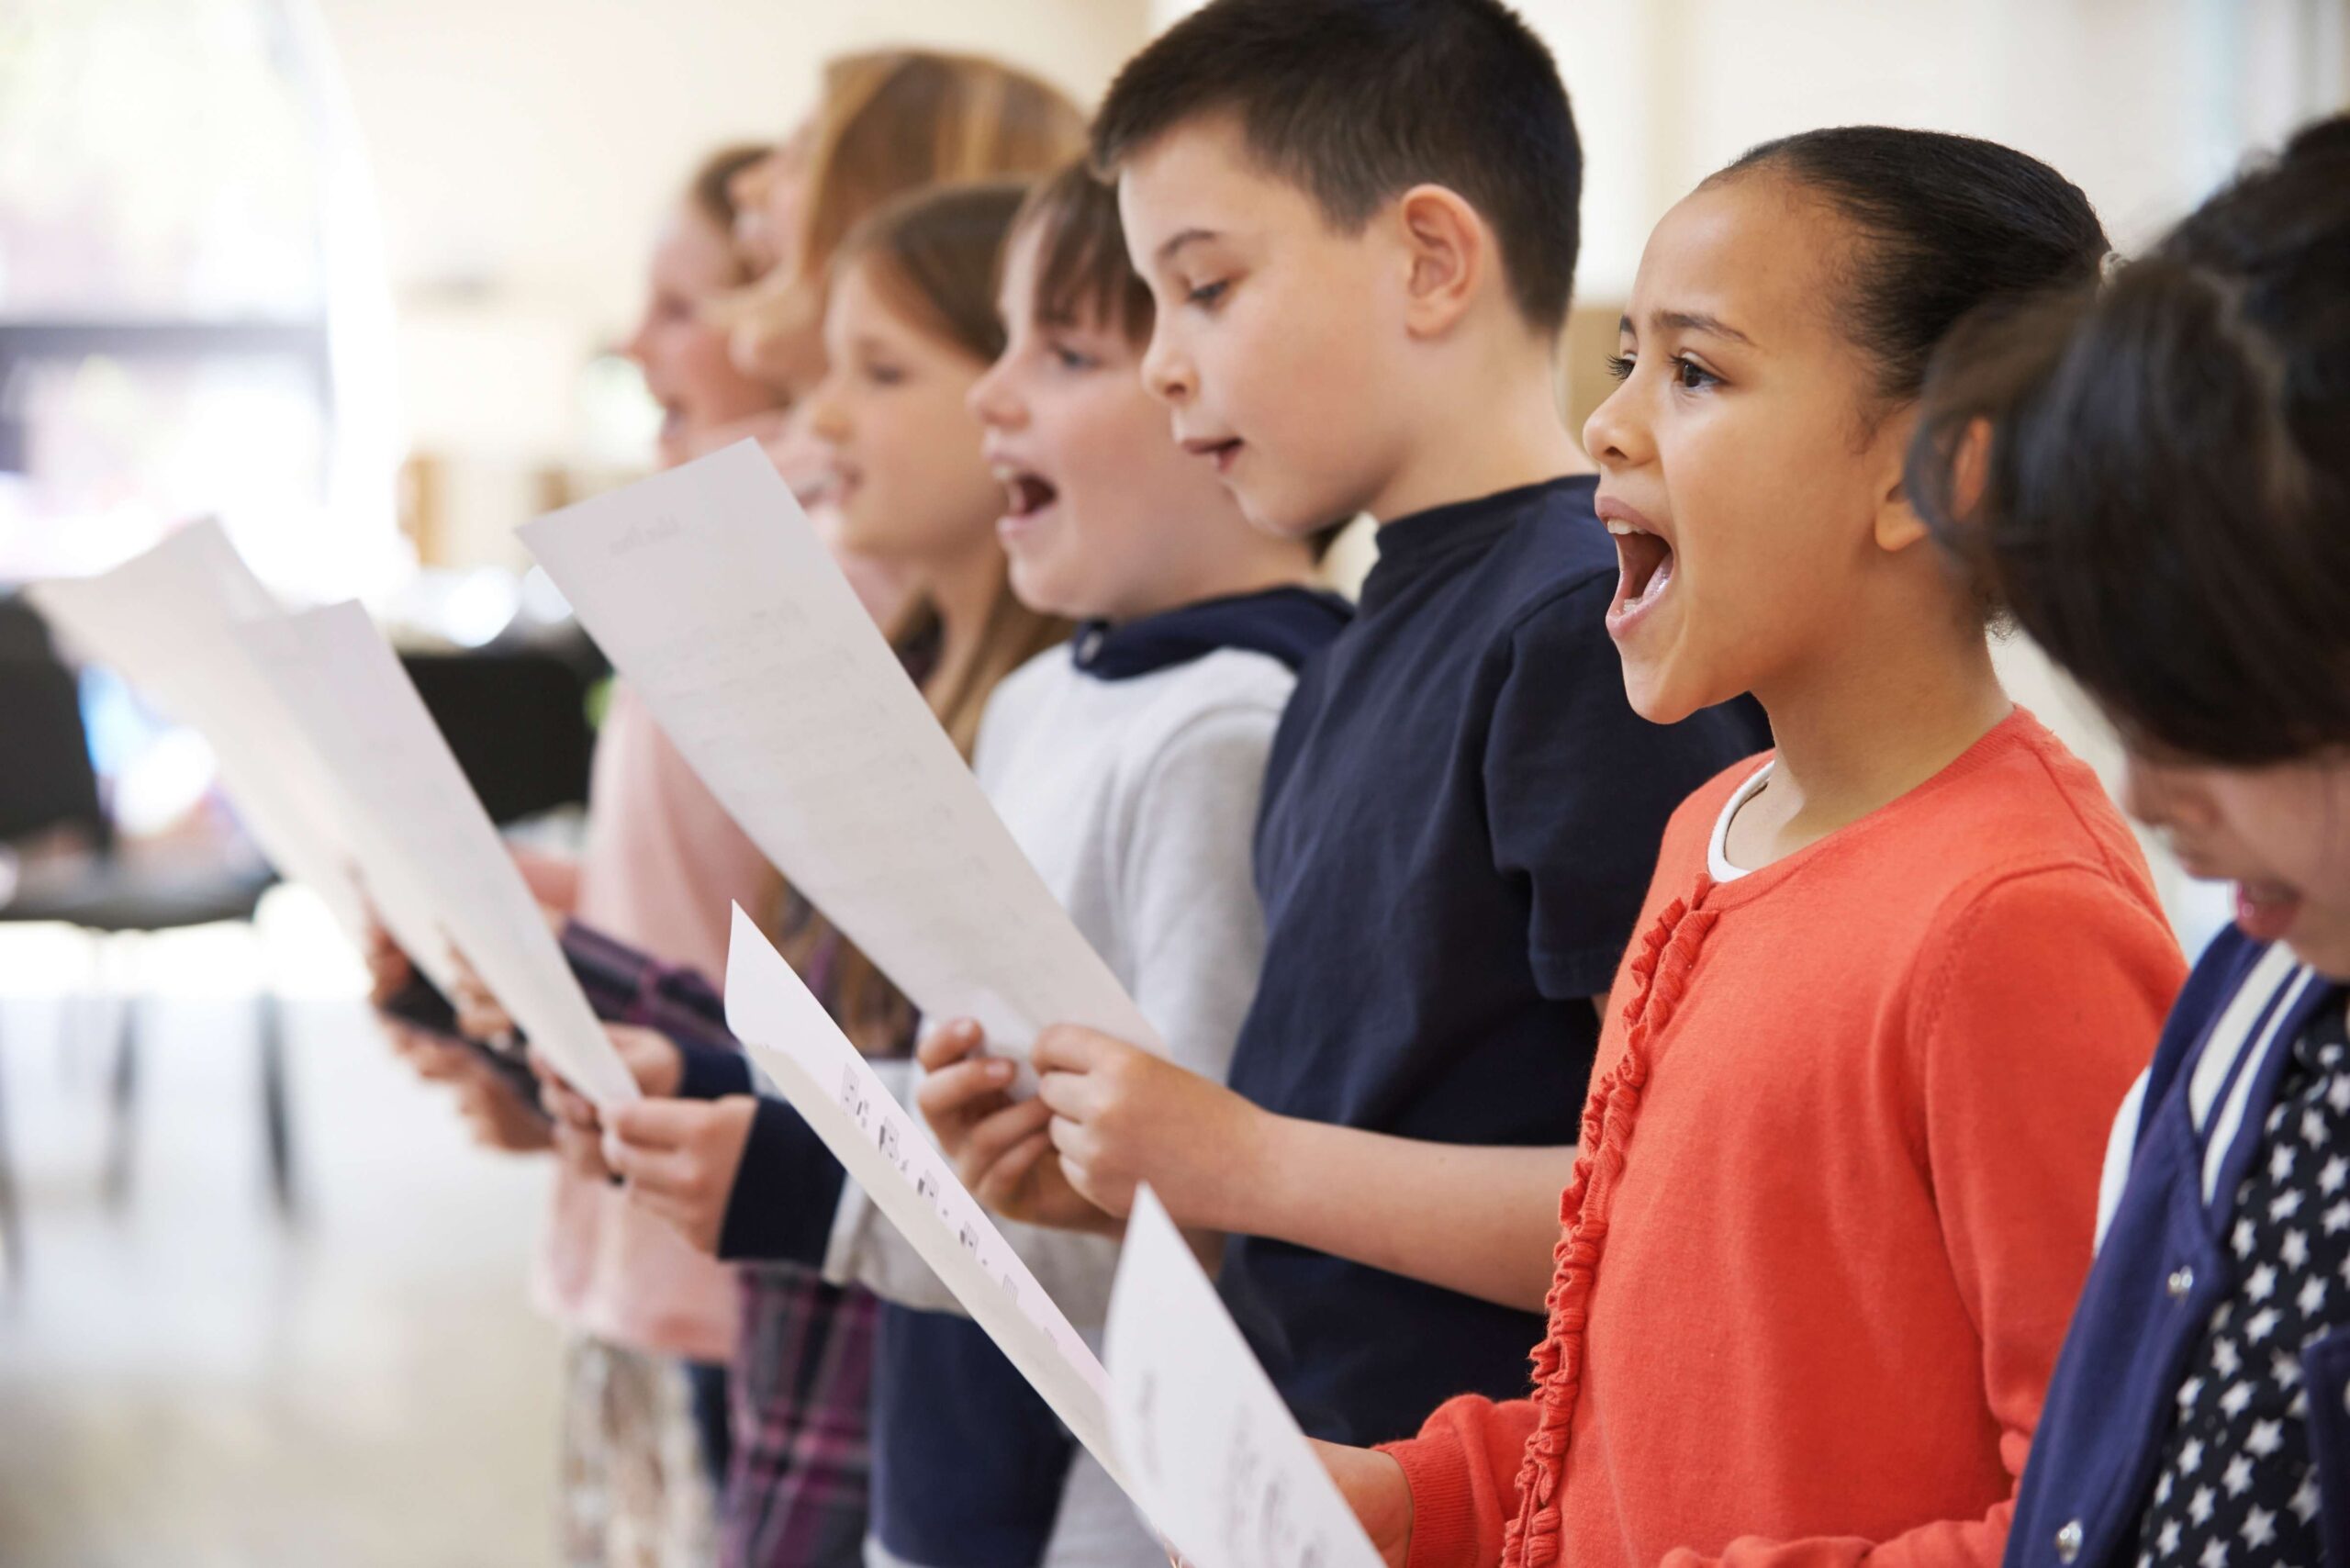 Encourage students to sing